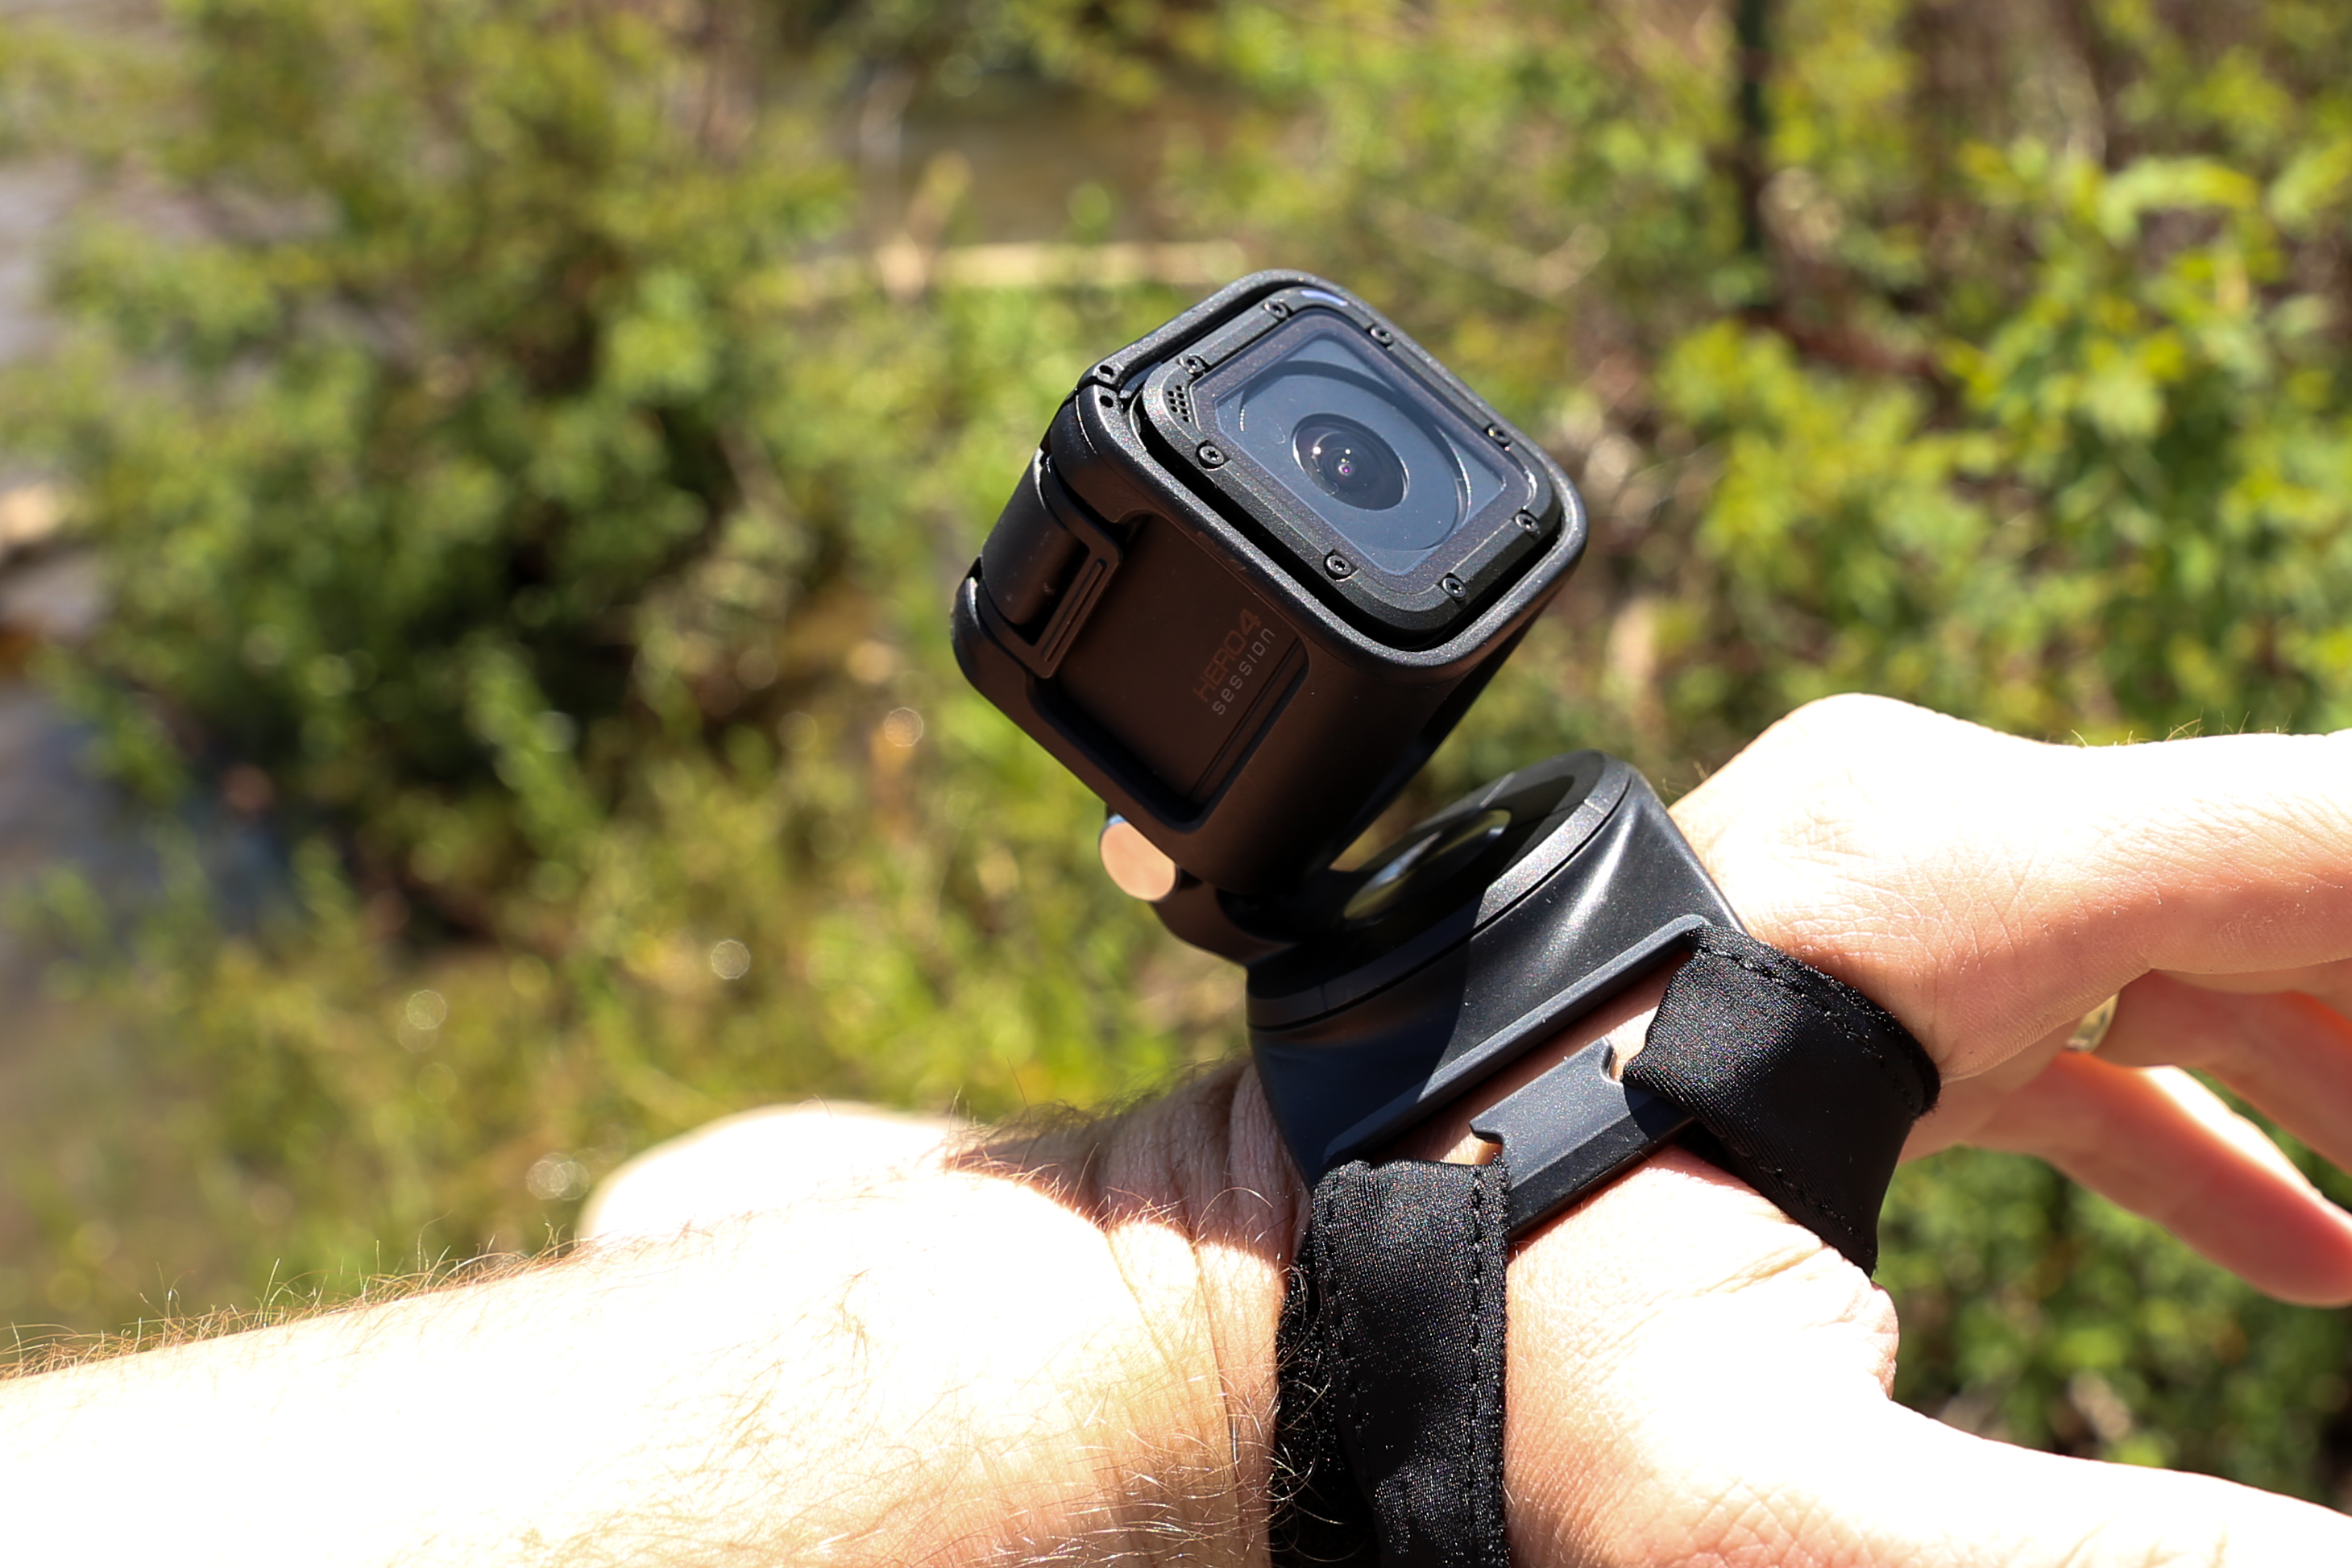 The GoPro Hero4 Session mounted to The Strap, GoPro's latest mount designed to work with the Session and all other GoPro cameras.